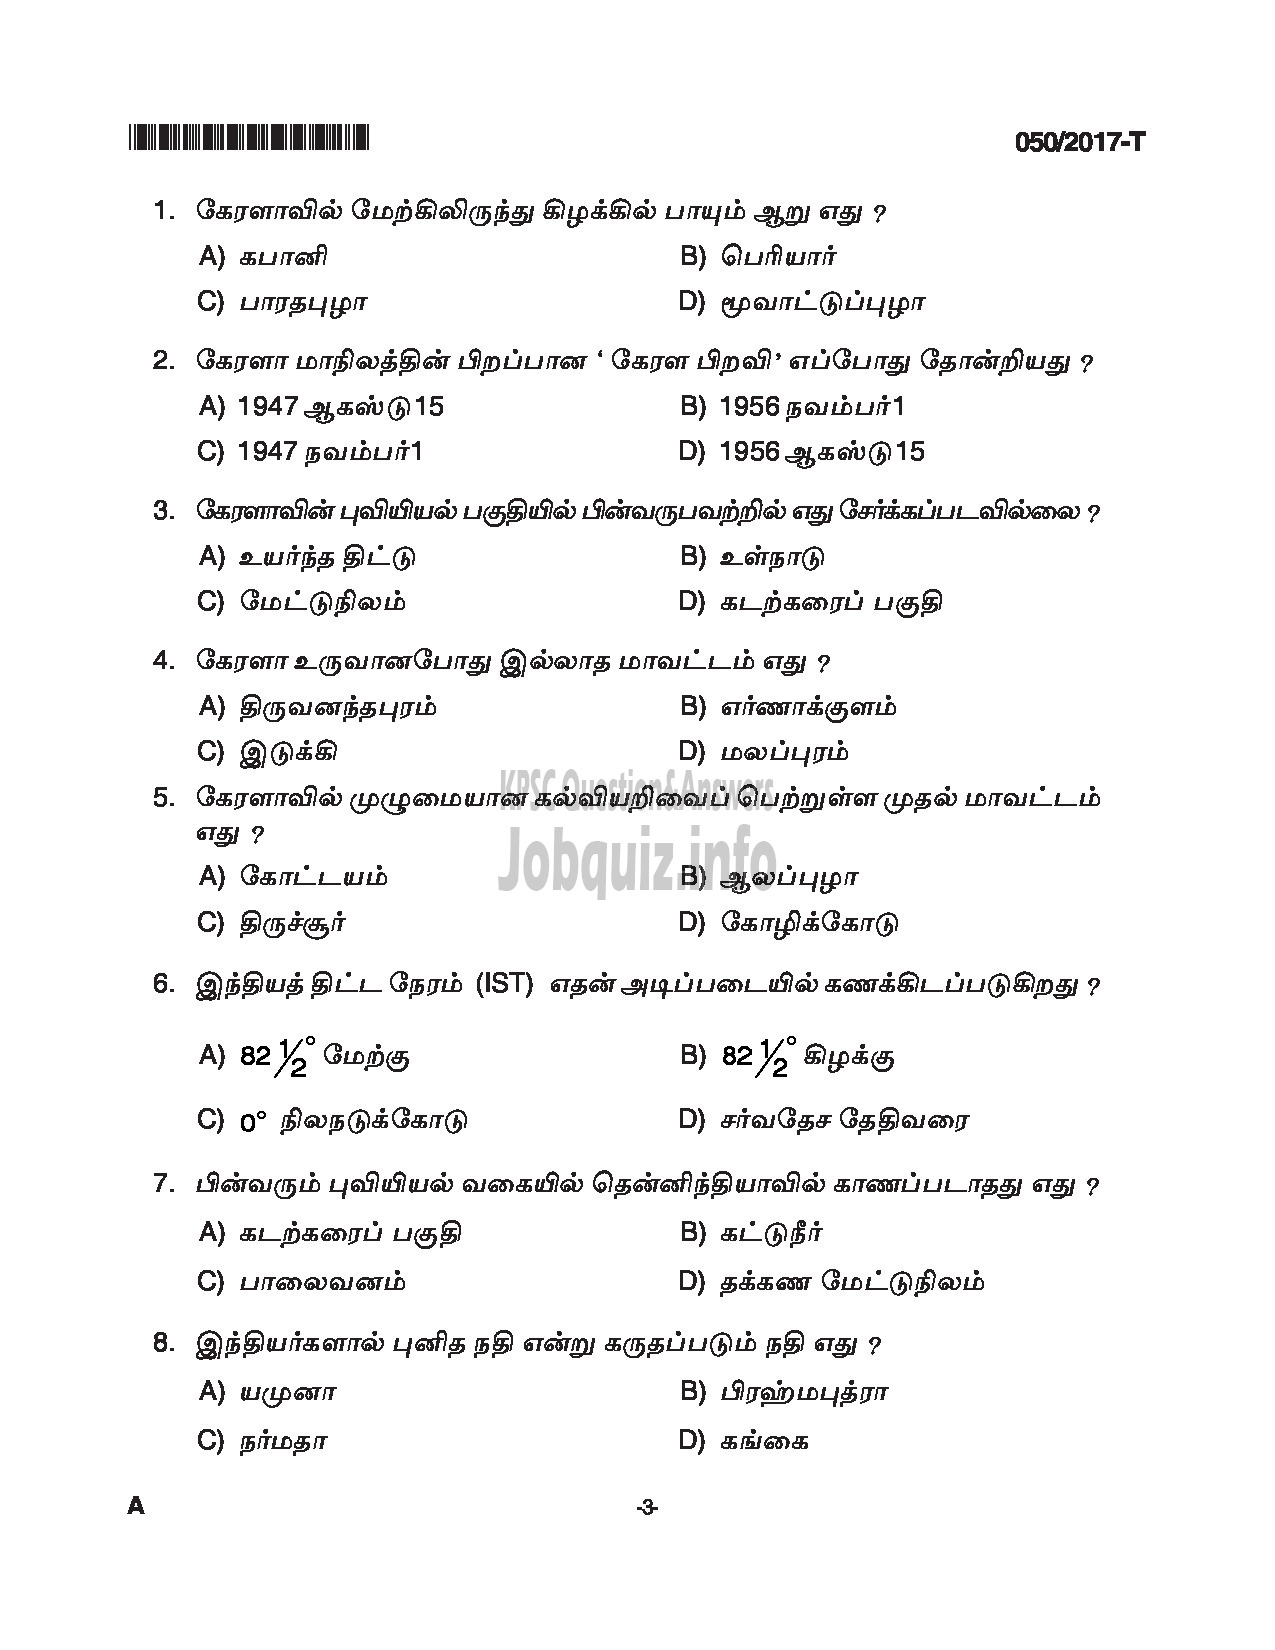 Kerala PSC Question Paper - LDC SR FOR SC/ST, SR FROM DIFFERENTLY ABLED CANDIDATES CAT.NO 122/16, 413/16 QUESTION PAPER(TAMIL)-3